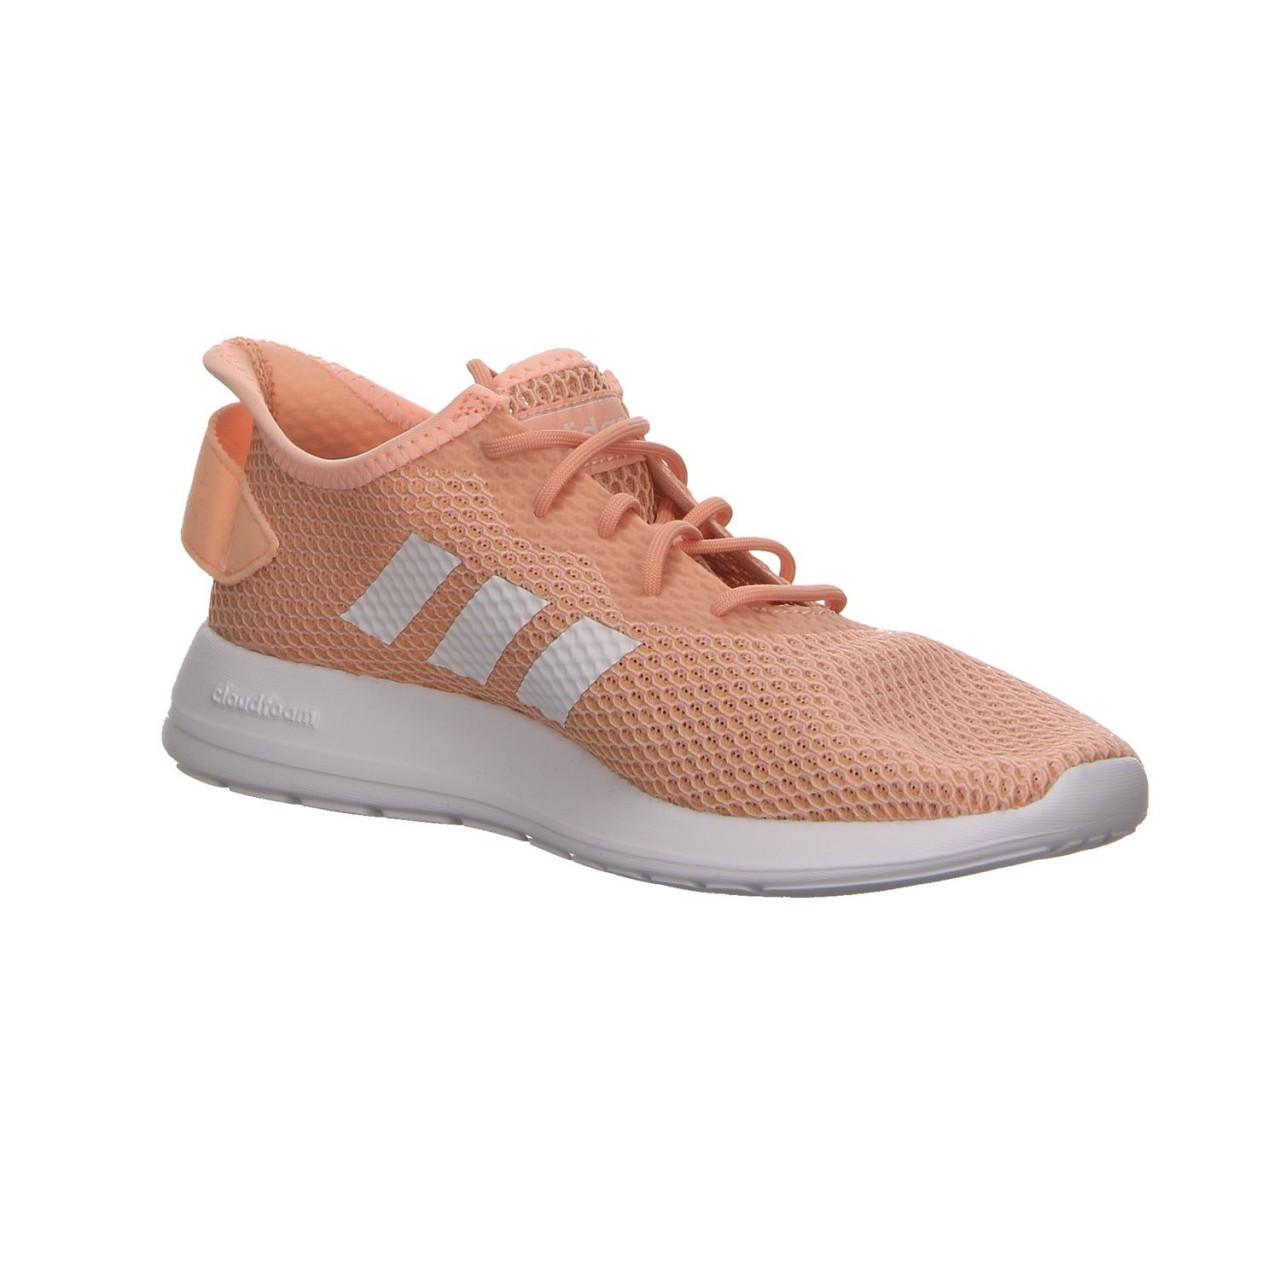 adidas Synthetic Wo Trainers Beige F36518 in Metallic - Lyst